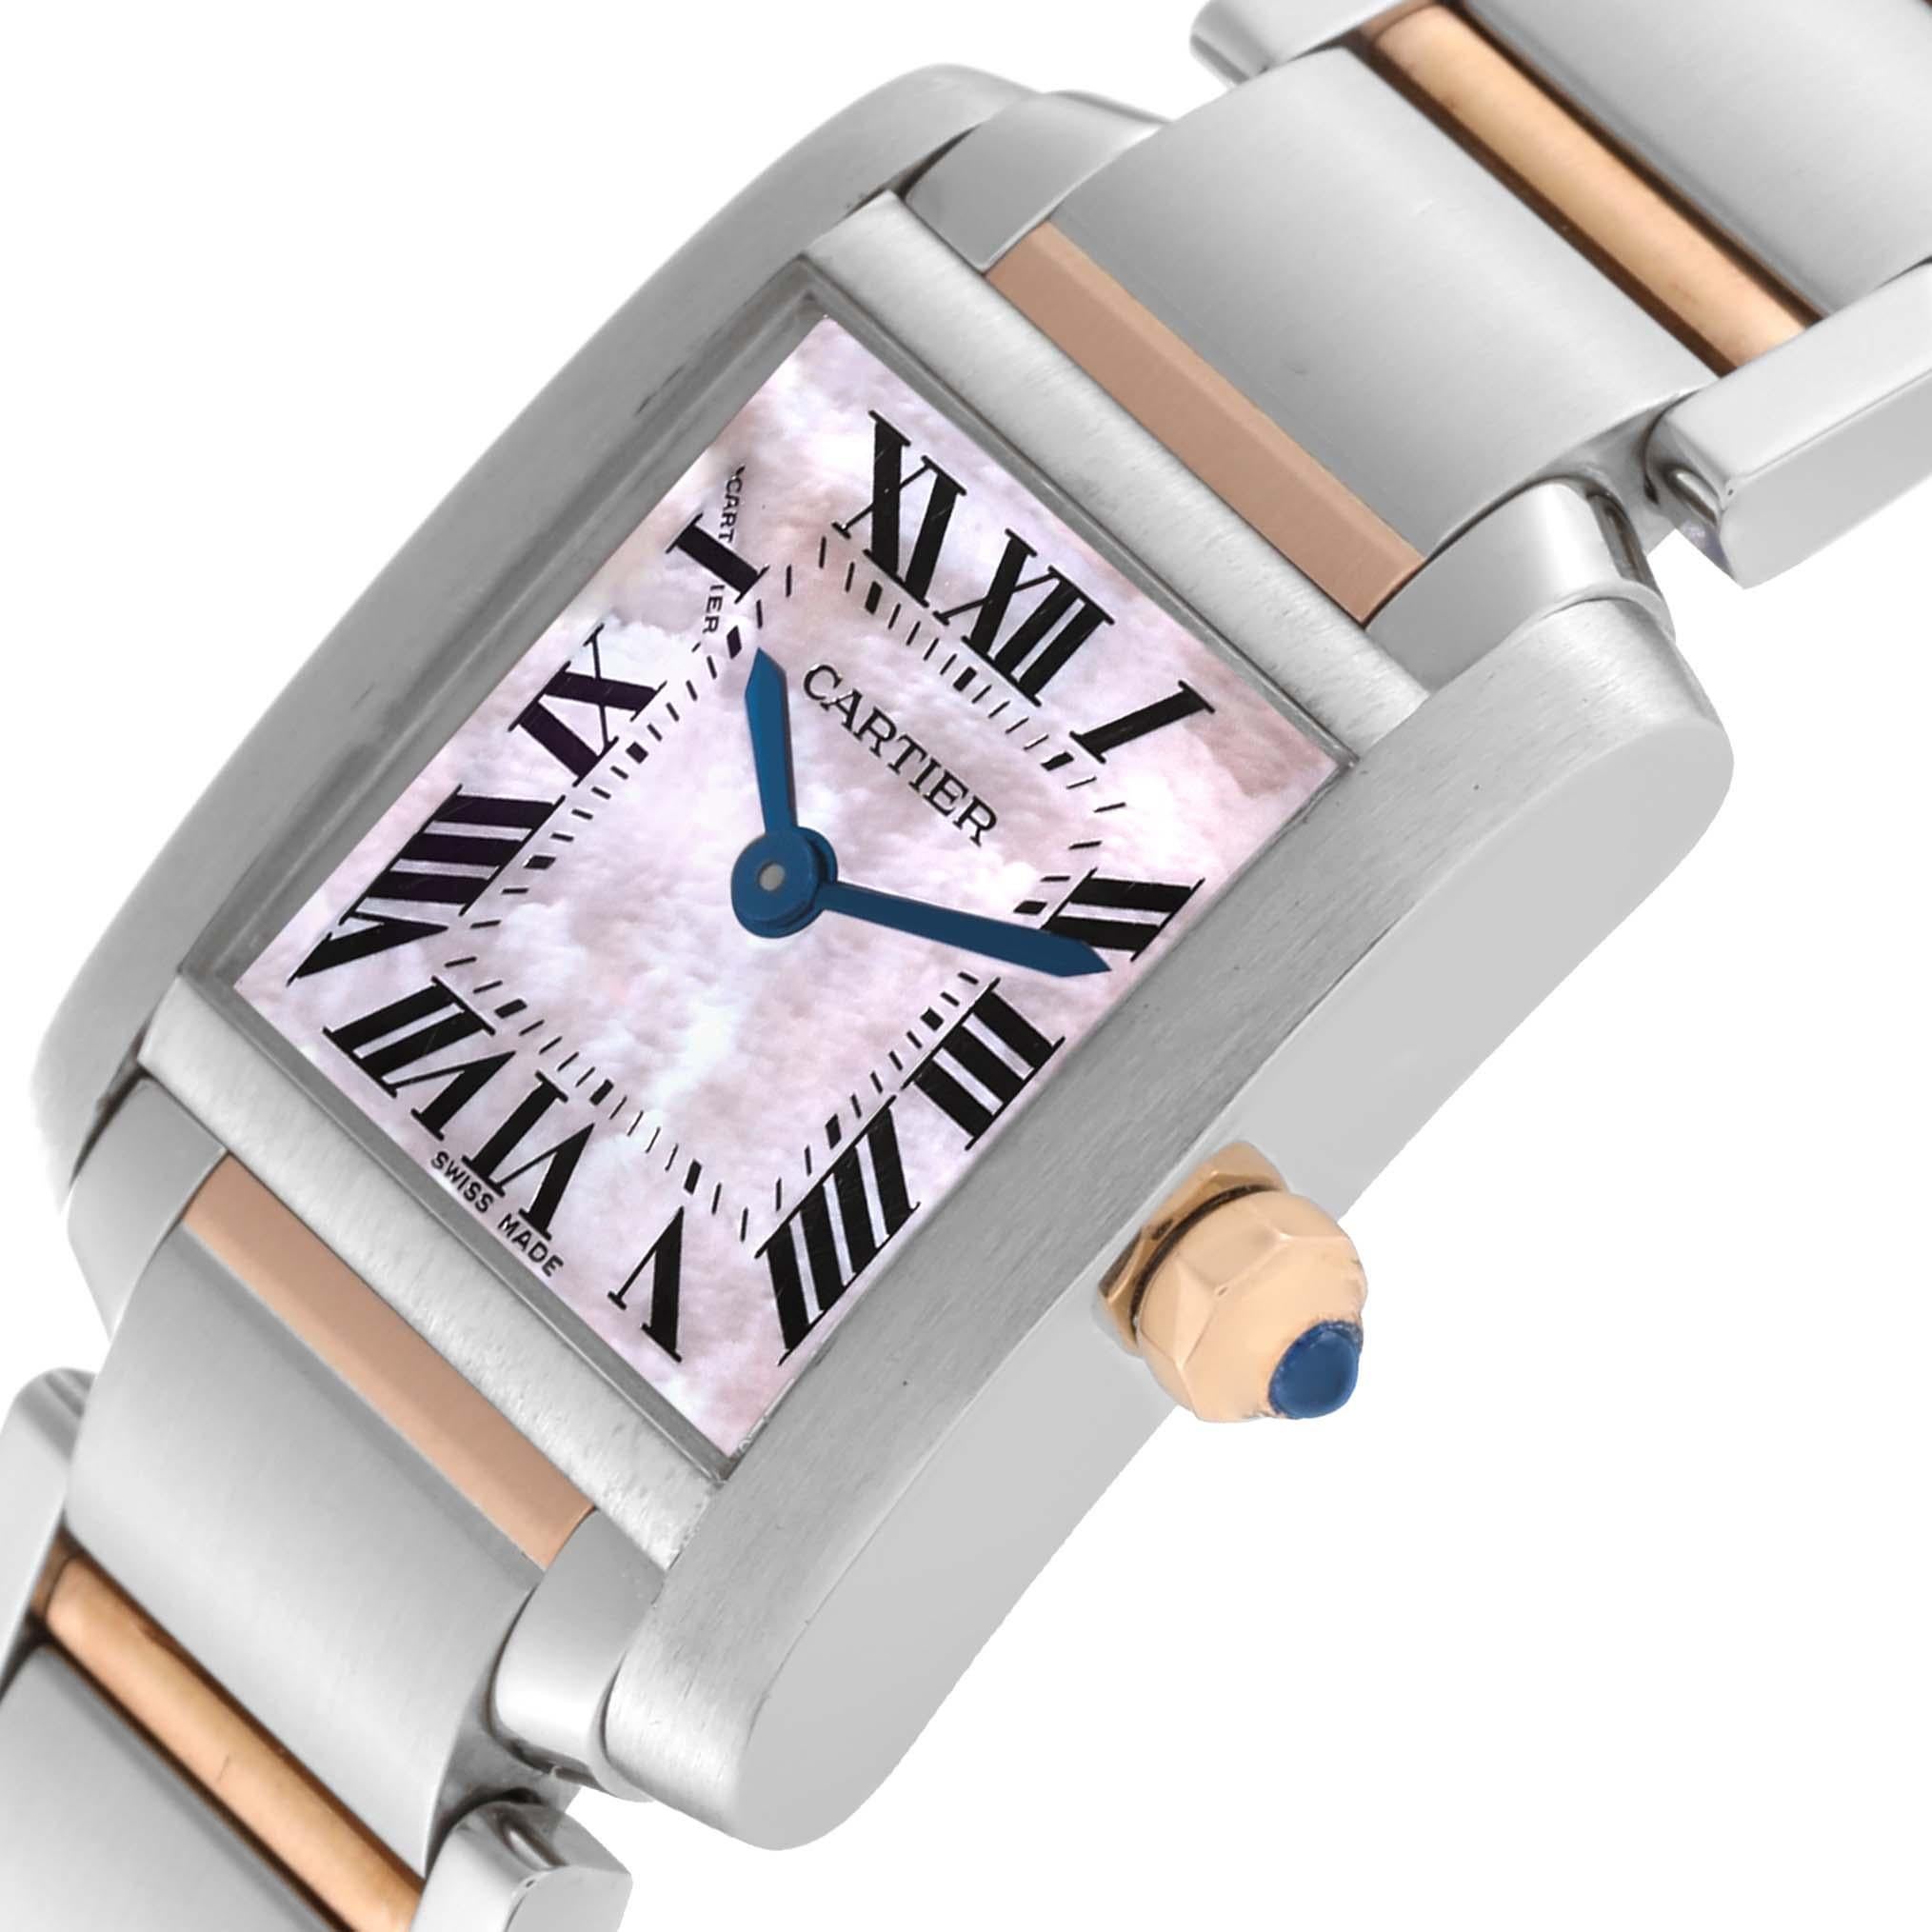 Cartier Tank Francaise Steel Rose Gold Mother of Pearl Ladies Watch W51027Q4. Quartz movement. Rectangular stainless steel 20.0 x 25.0 mm case. Octagonal 18k rose gold crown set with a blue spinel cabochon. . Scratch resistant sapphire crystal. Pink